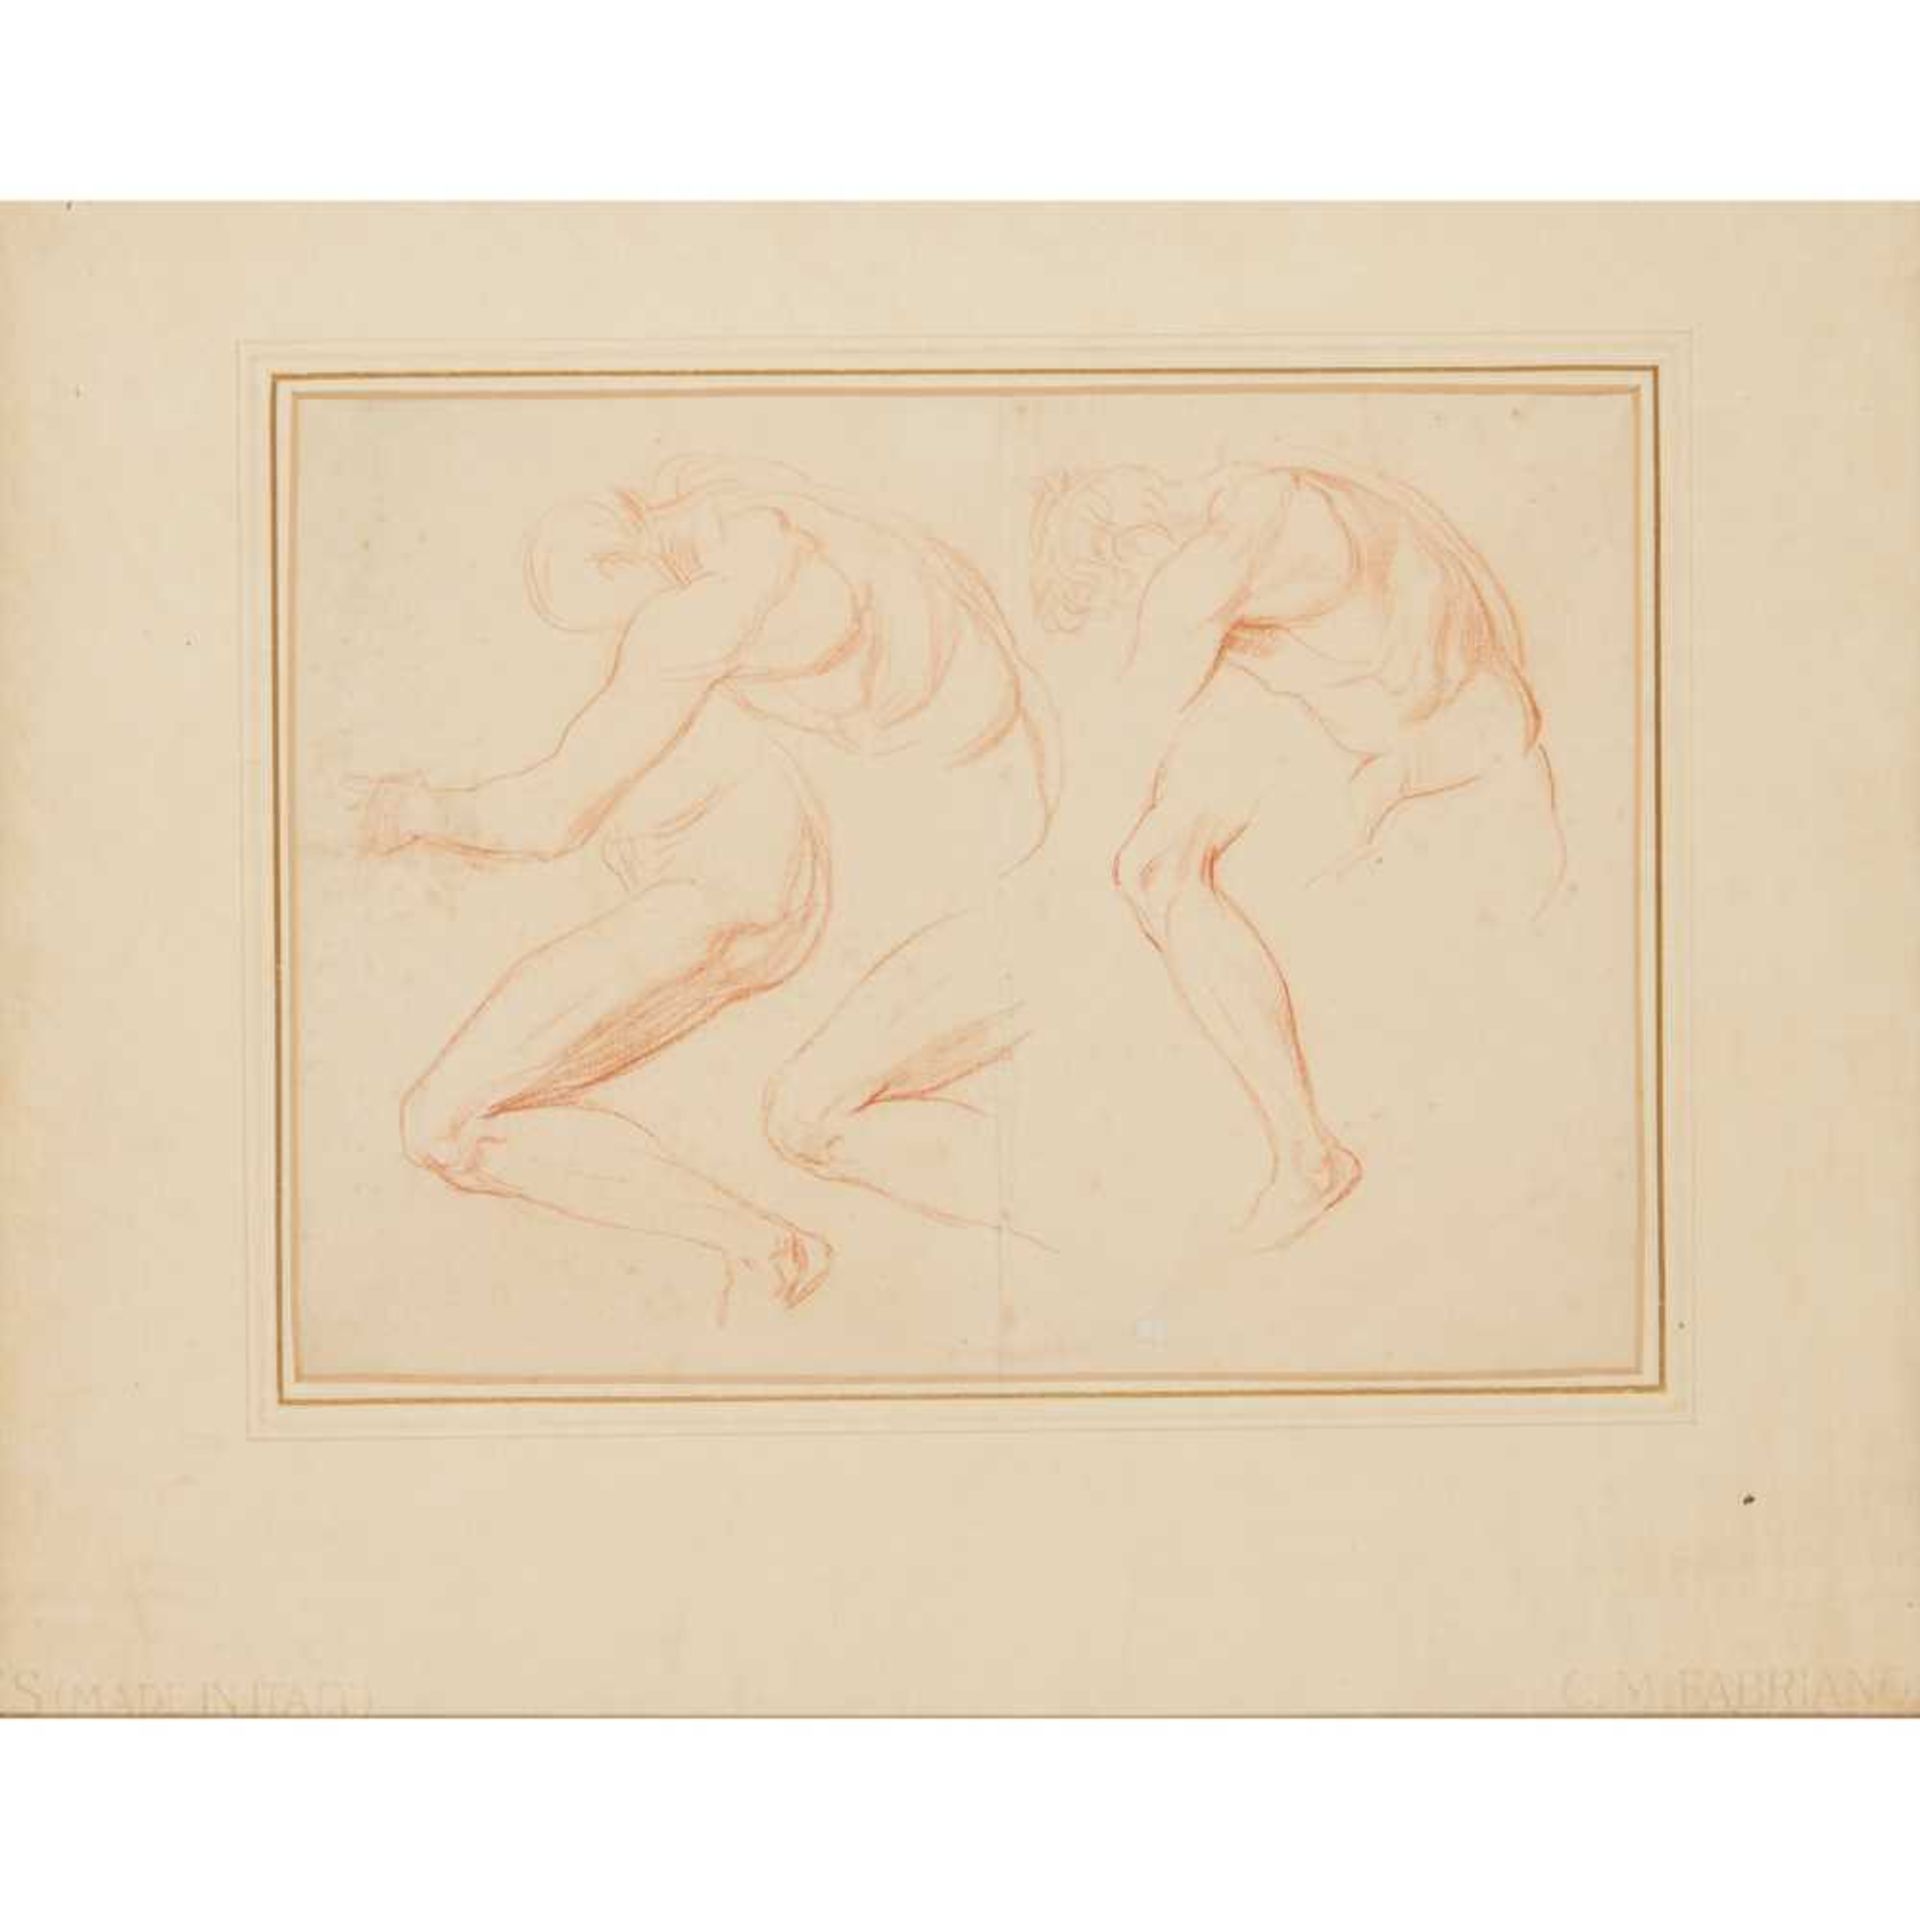 GEORGE FREDERICK WATTS (1817-1904) STUDIES OF THE MALE NUDE